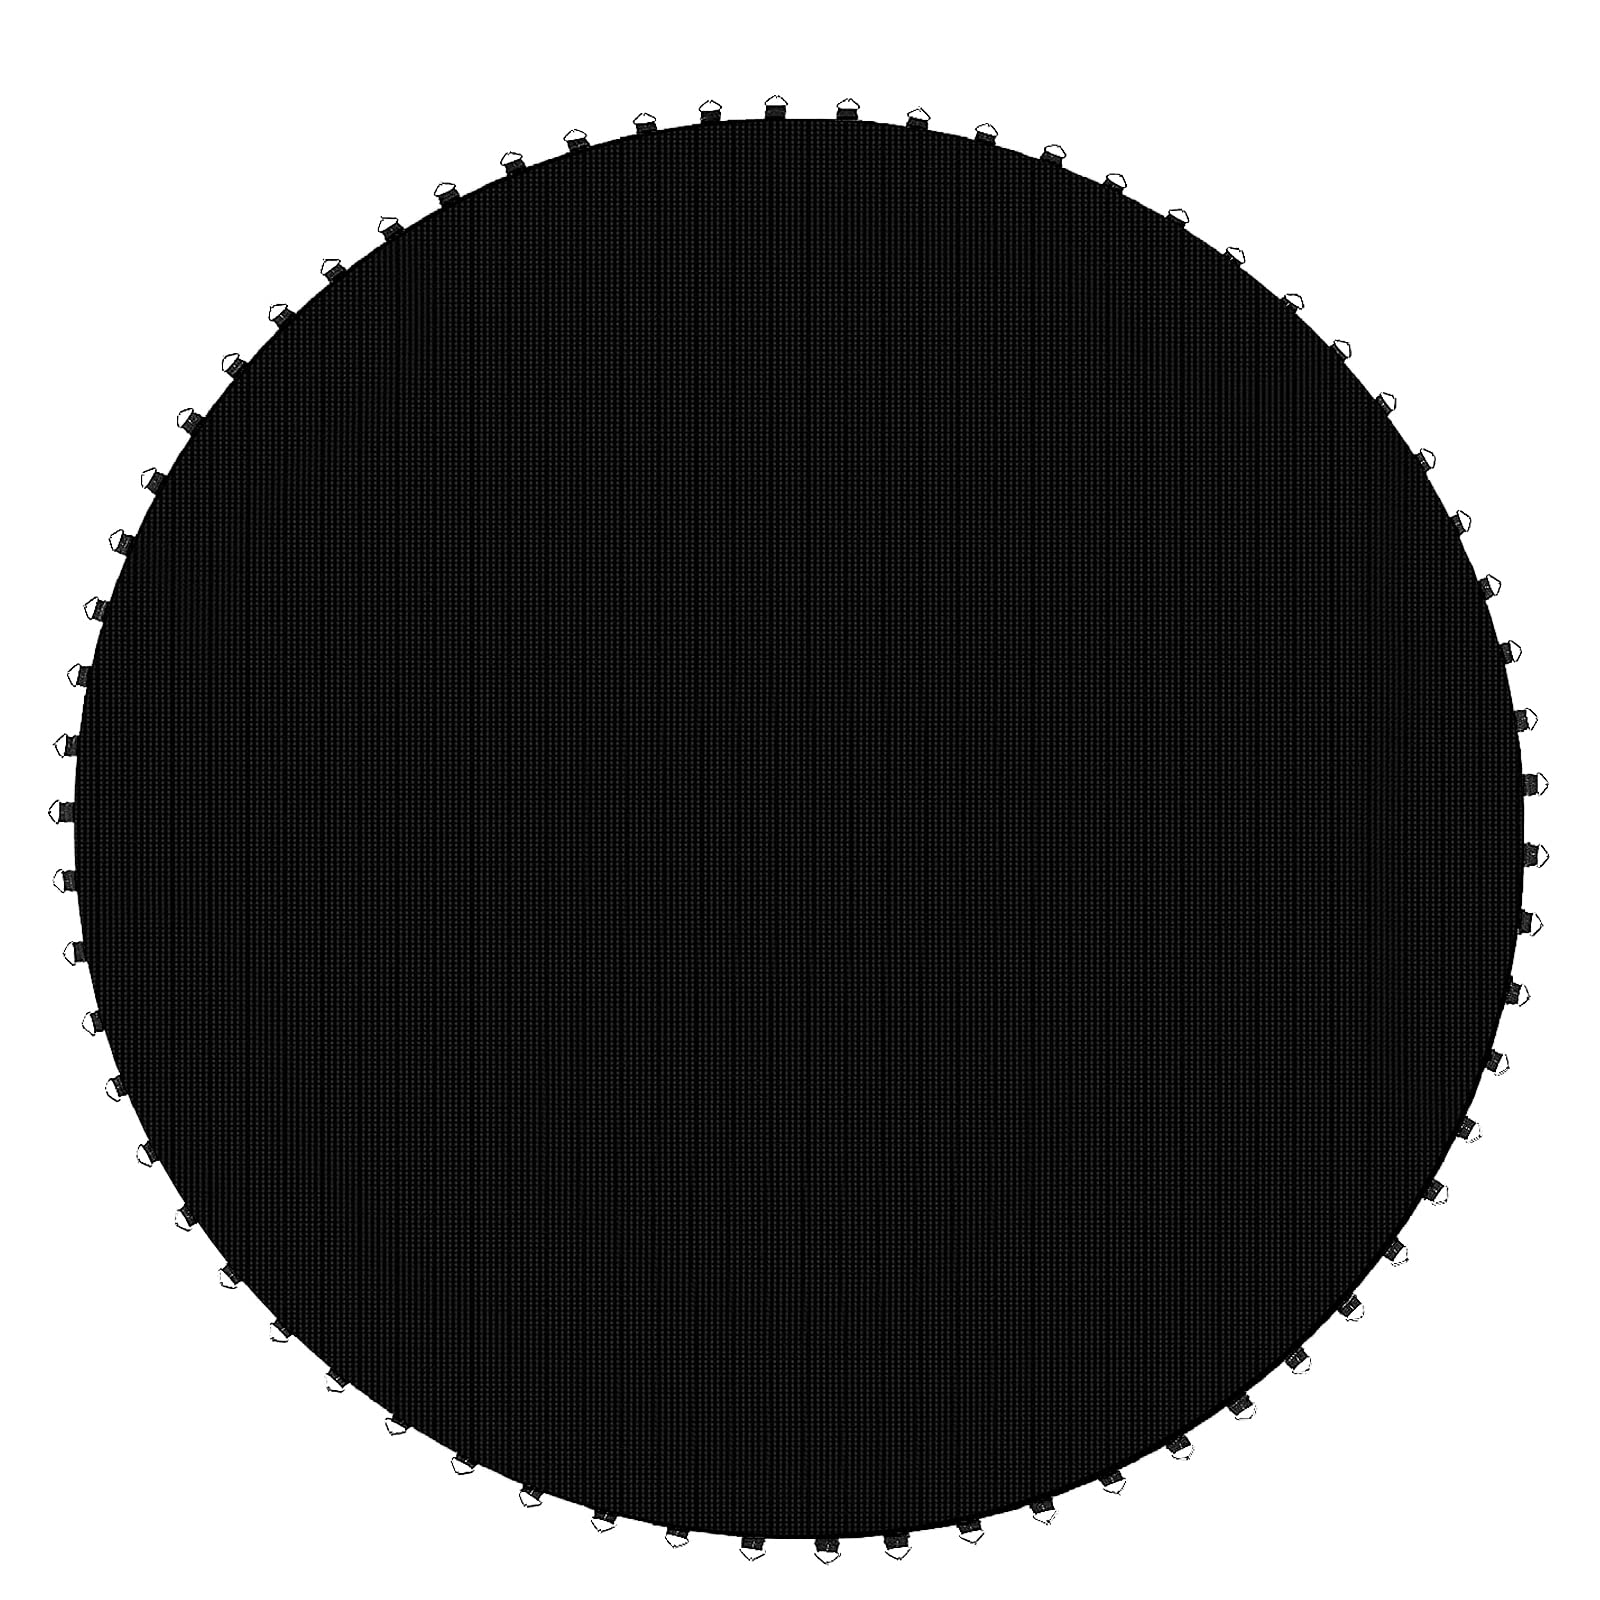 Replacement Trampoline Mat, High-Elastic PP Weather-Resistant Mat Fits 8 10 12 14 16ft Round Frame